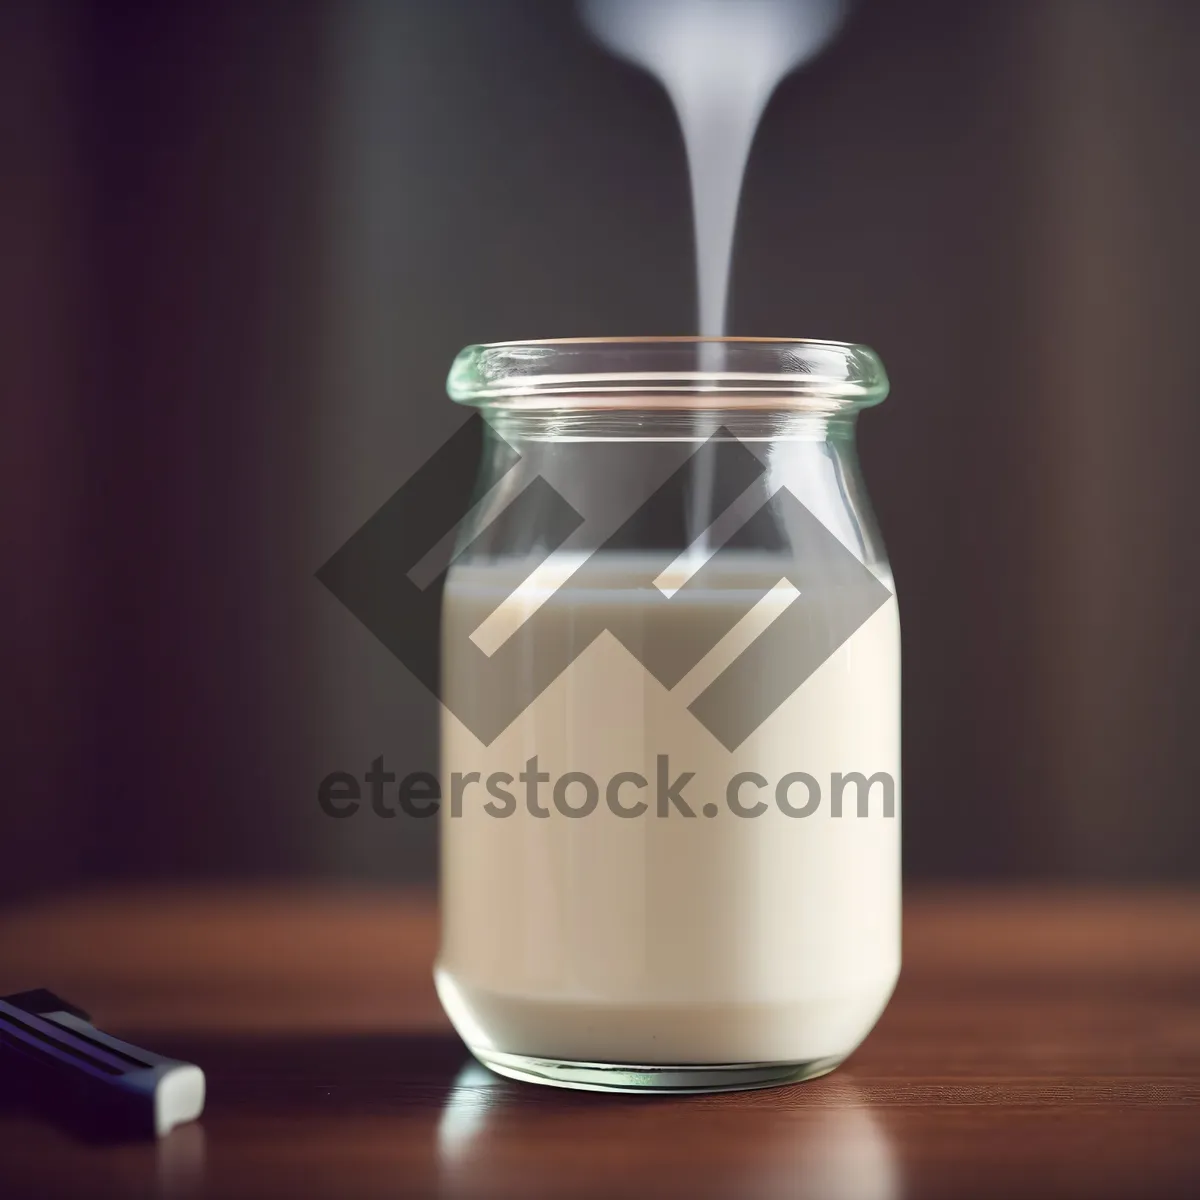 Picture of Milk in Glass Bottle - Dairy Drink for Health